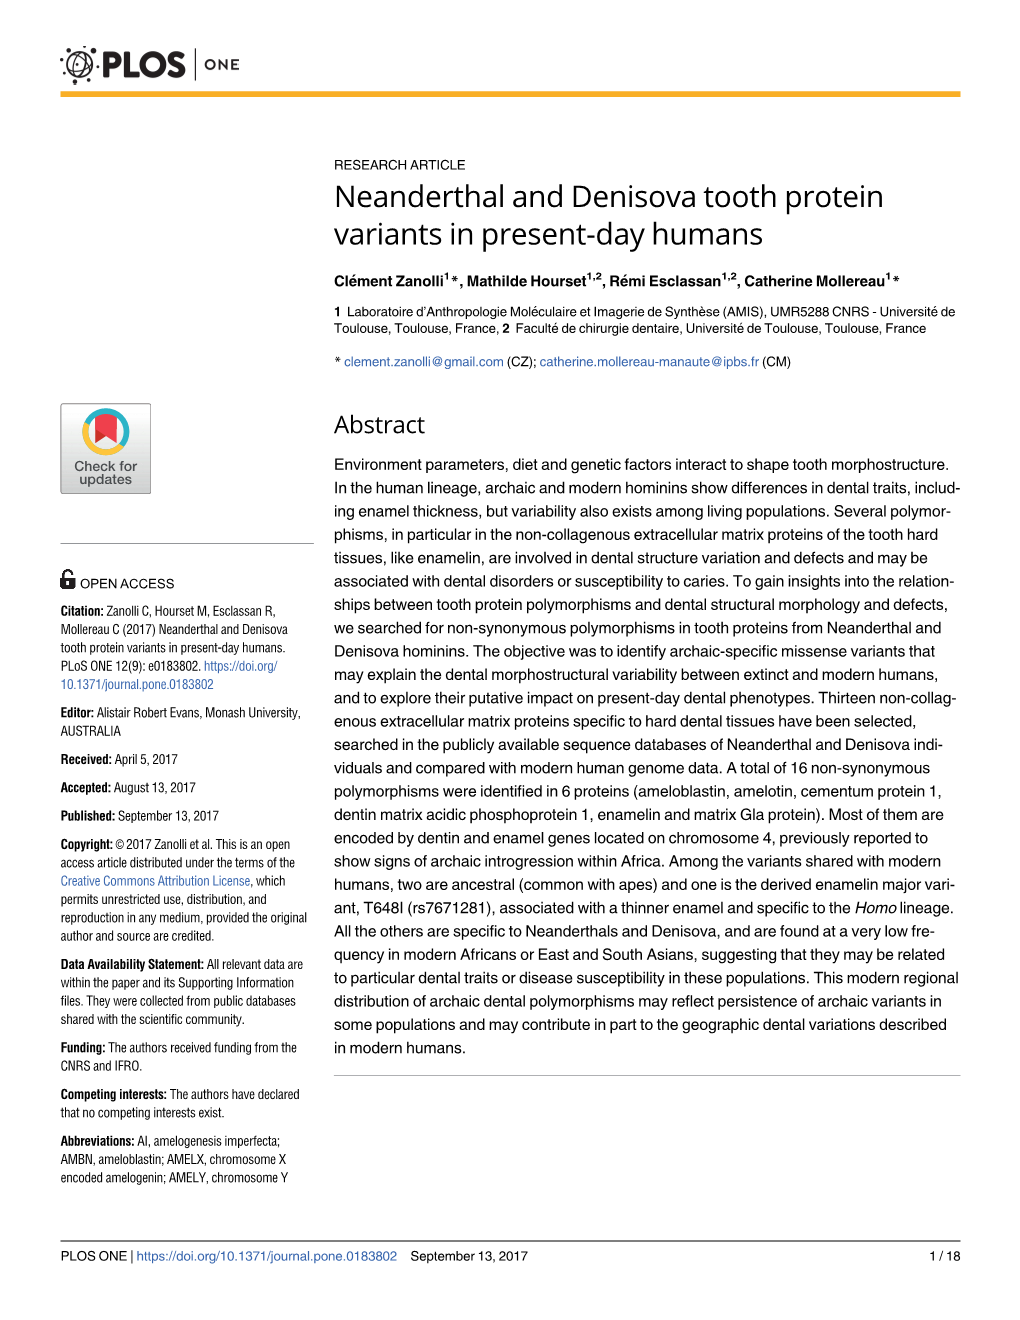 Neanderthal and Denisova Tooth Protein Variants in Present-Day Humans